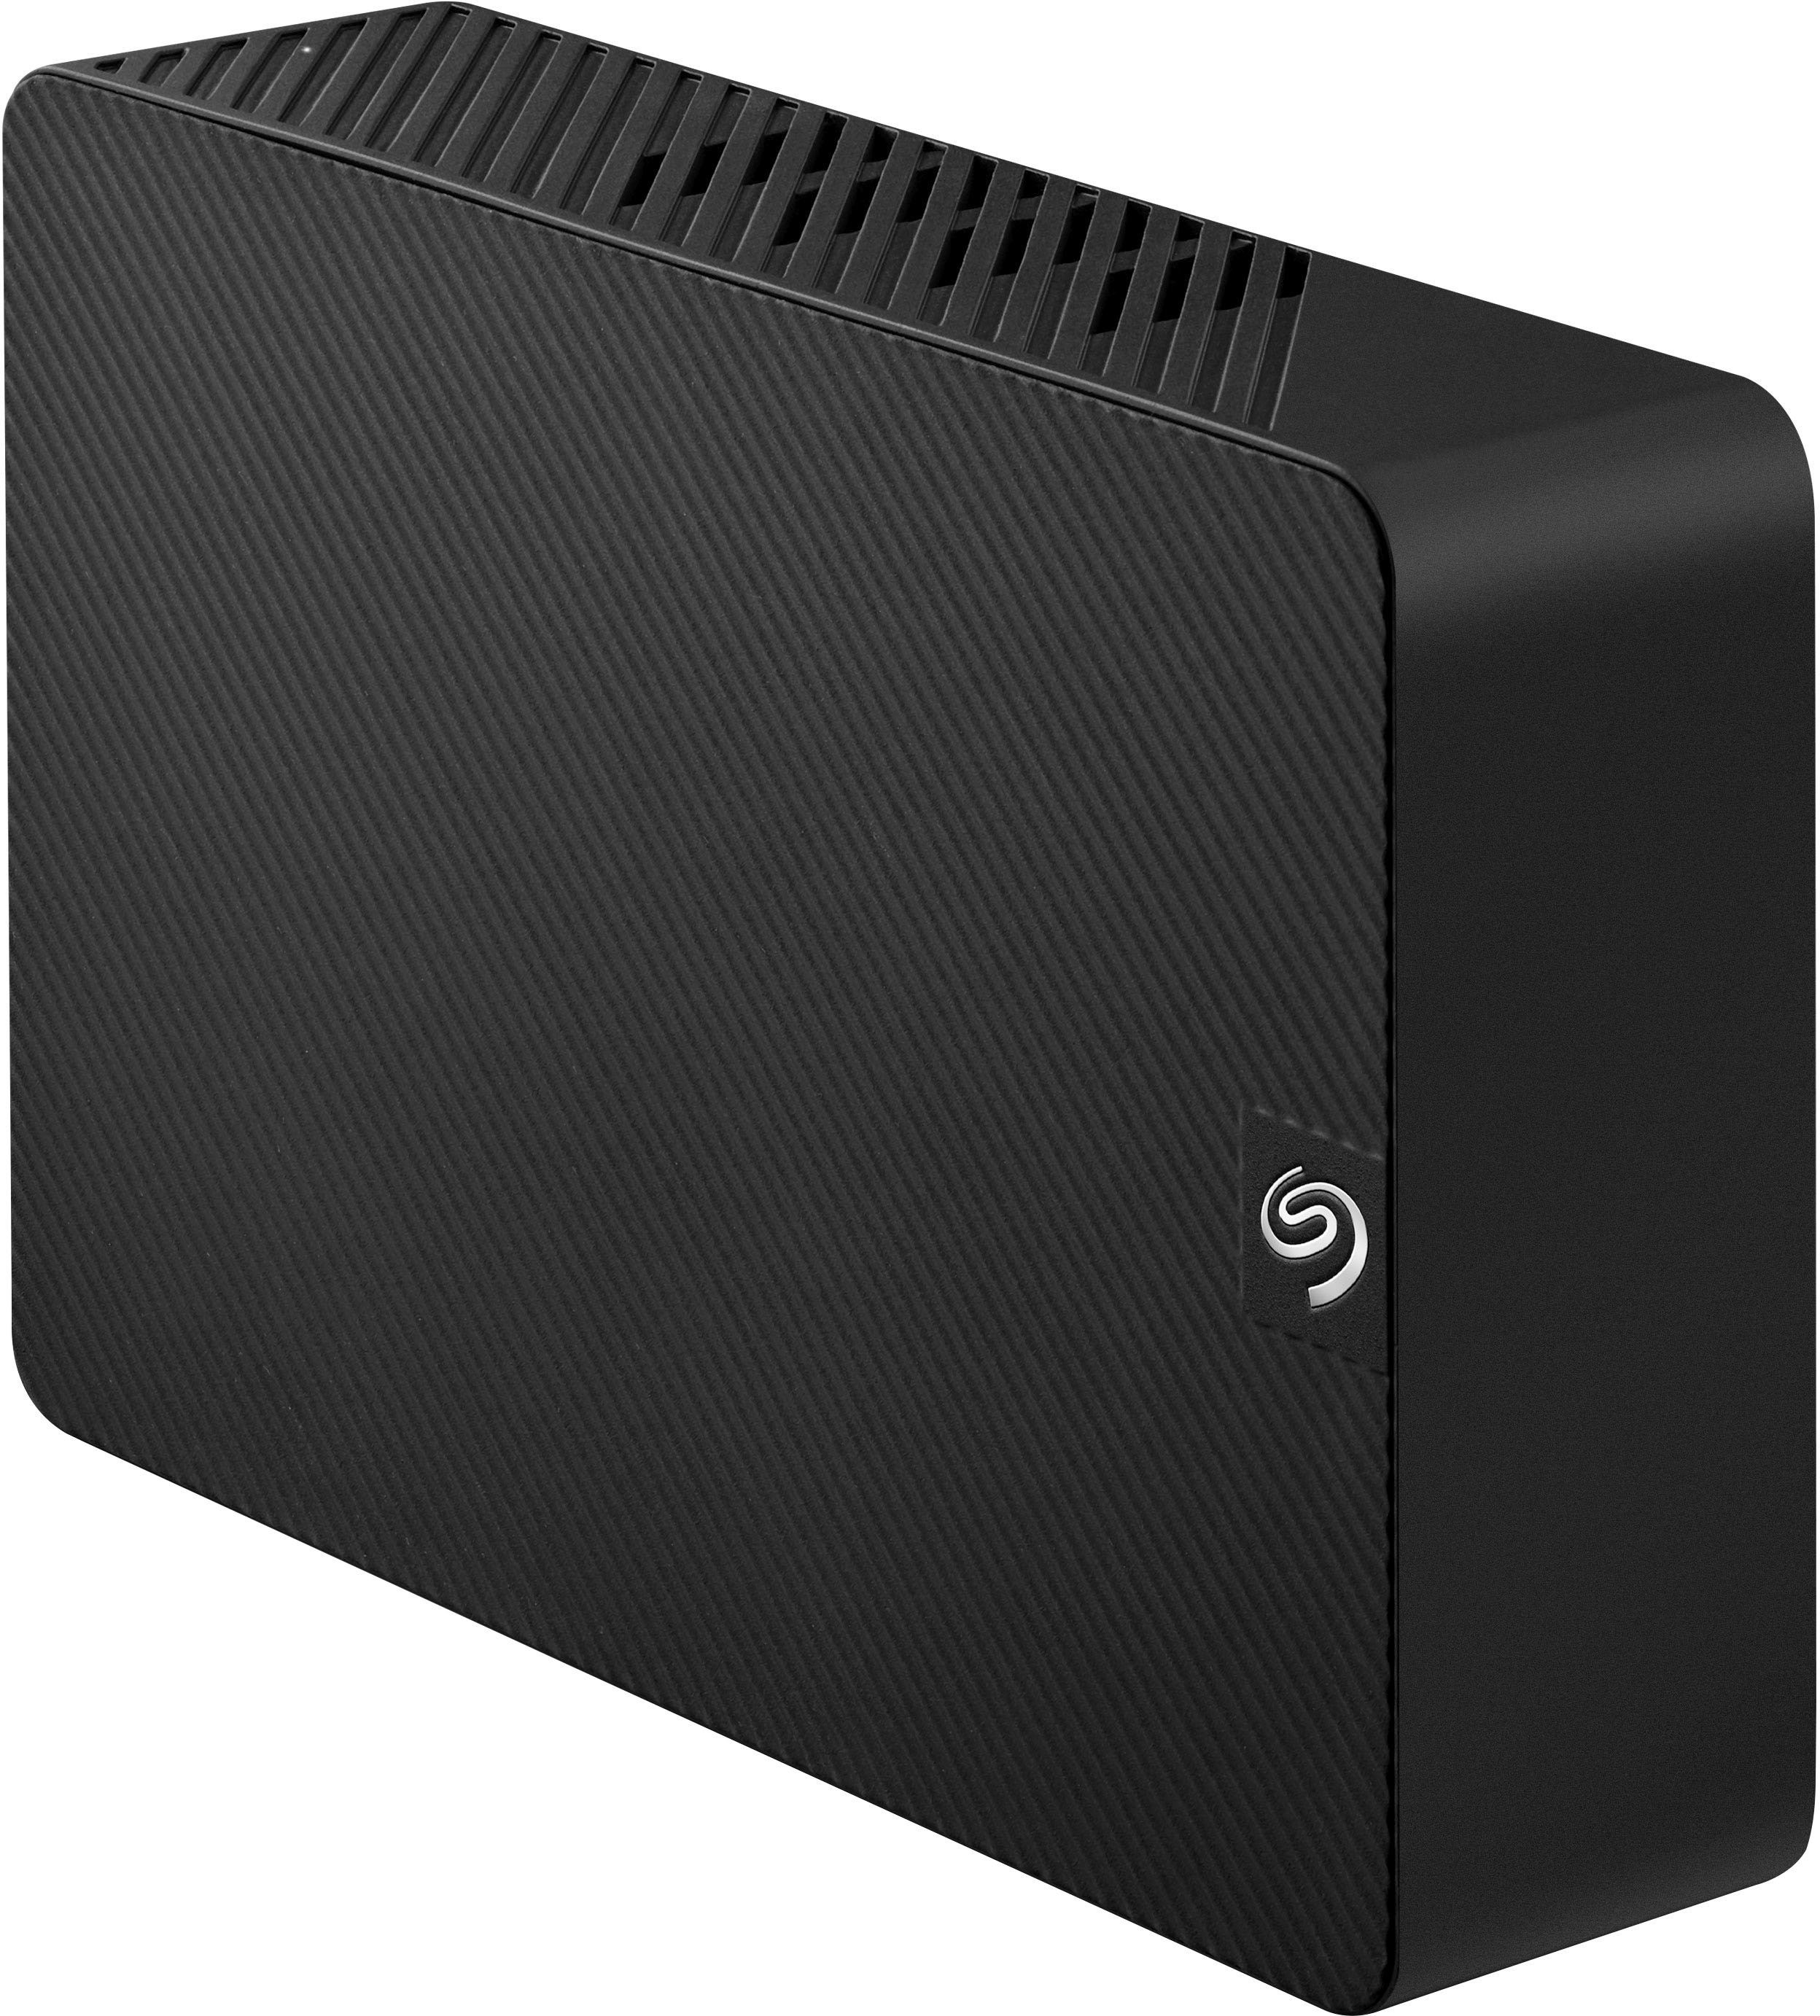 Seagate Expansion 16TB External USB 3.0 Desktop Hard Drive with